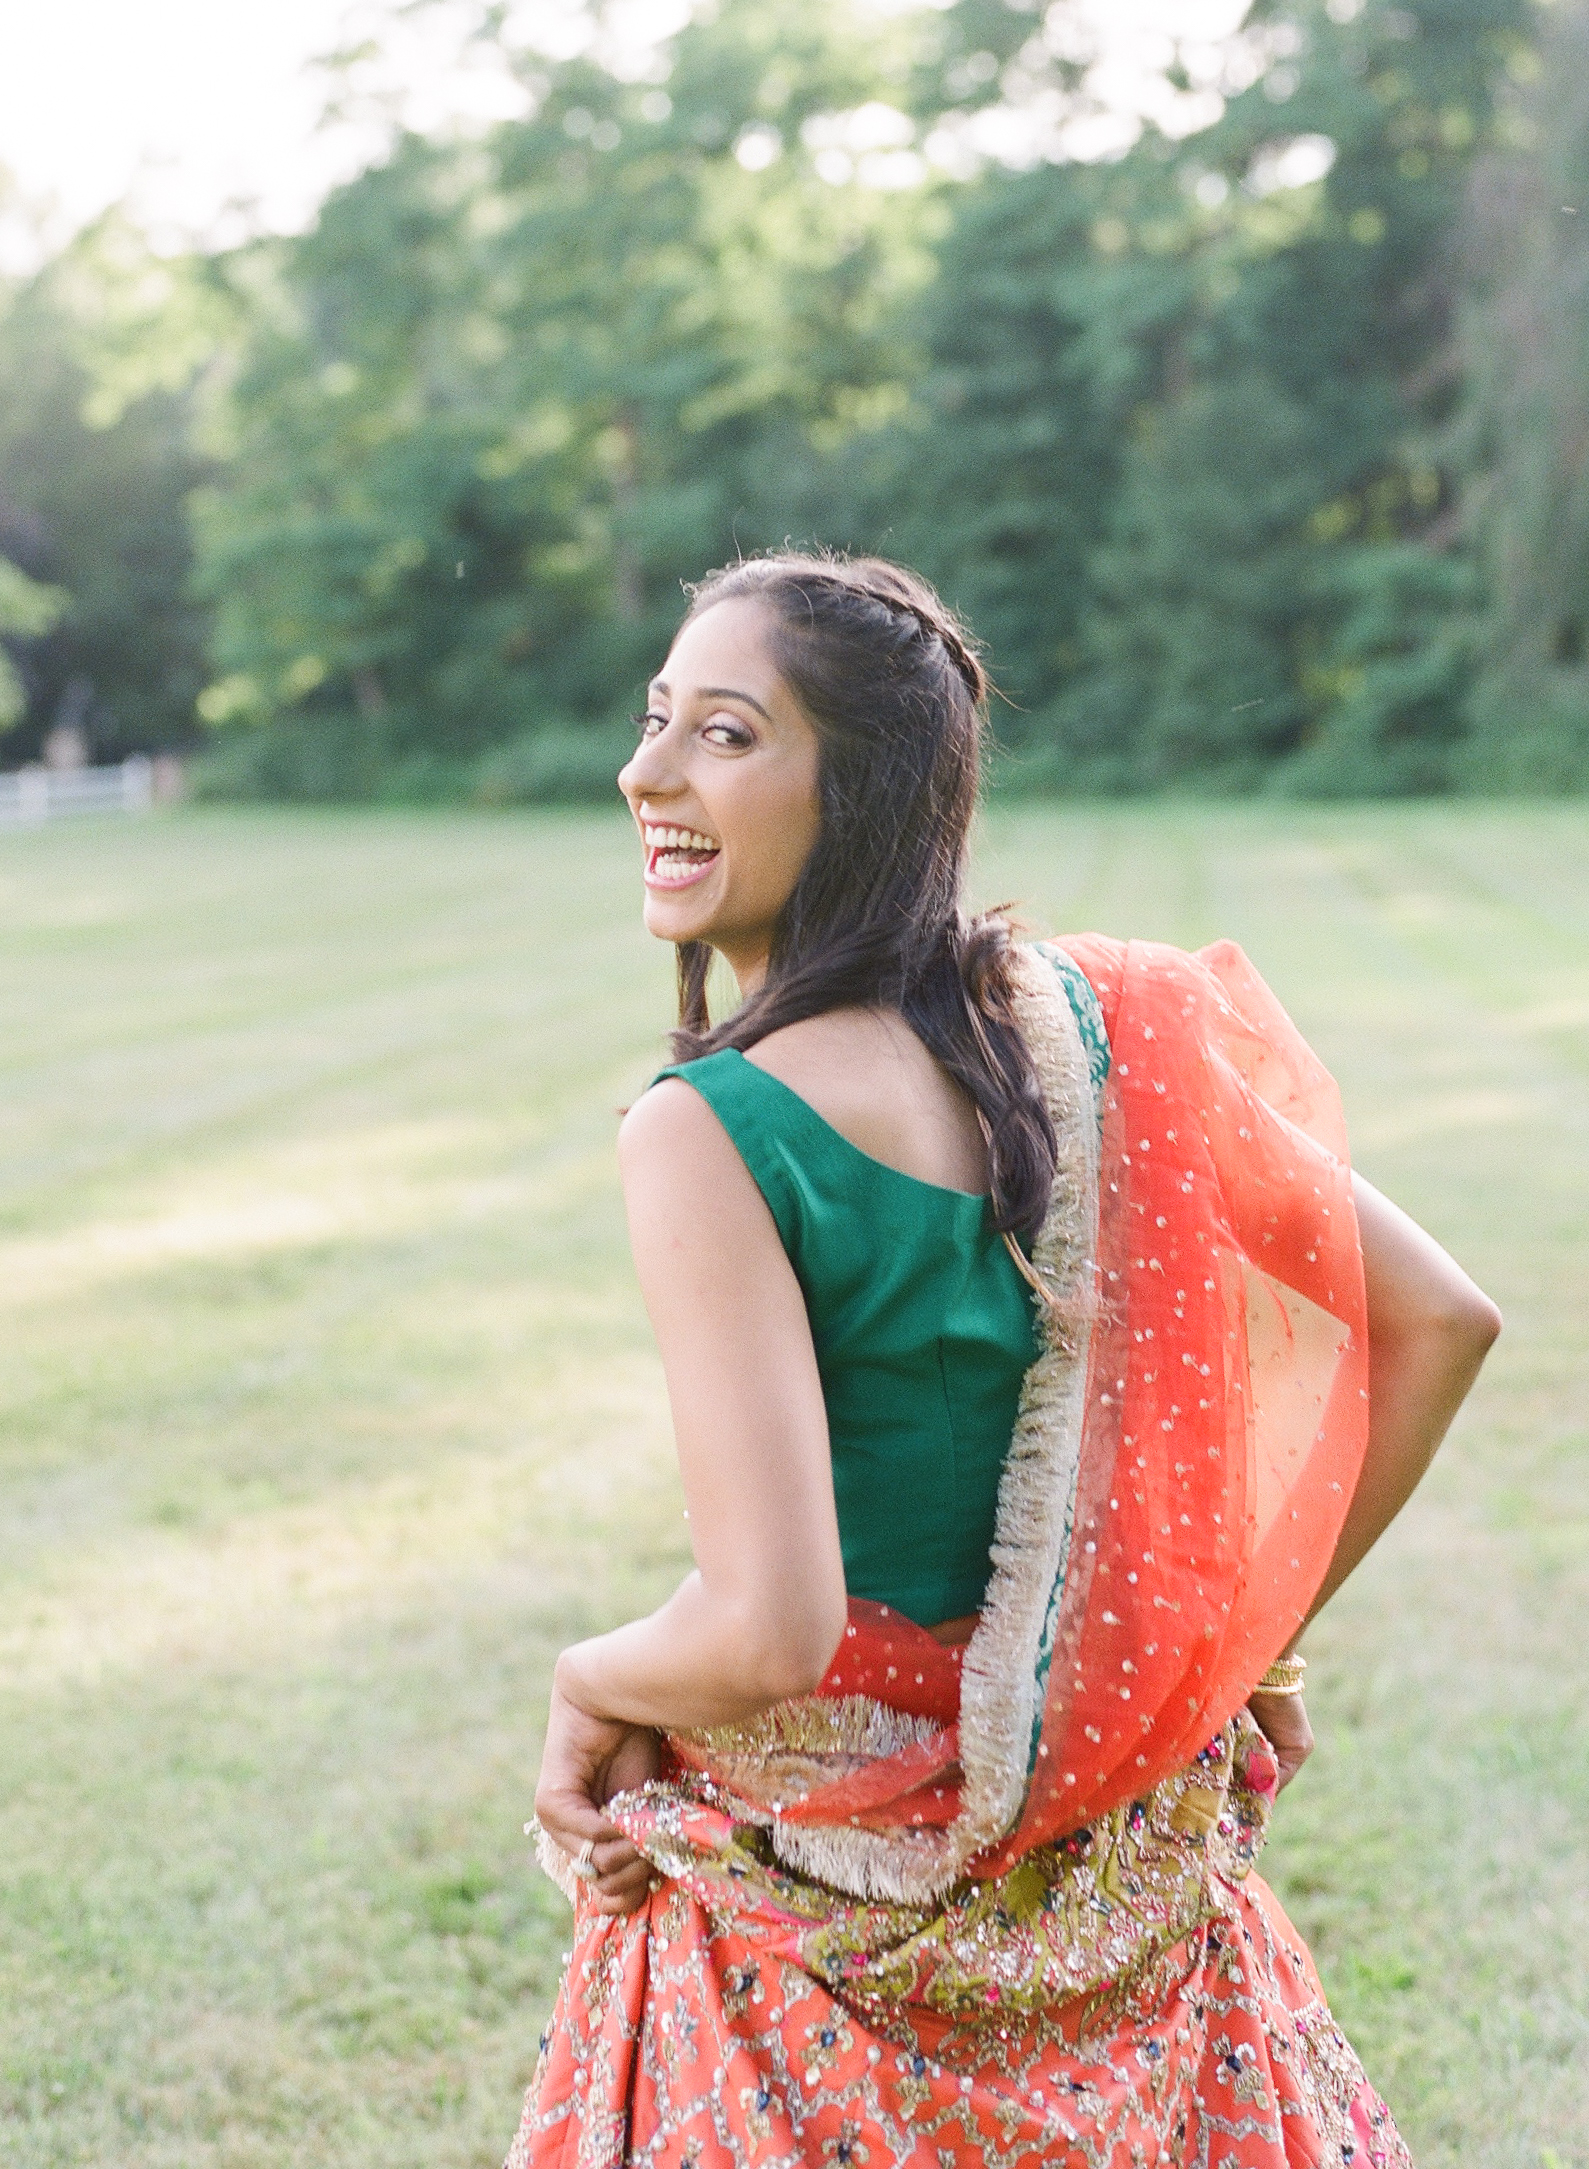 New Jersey South Asian Bride